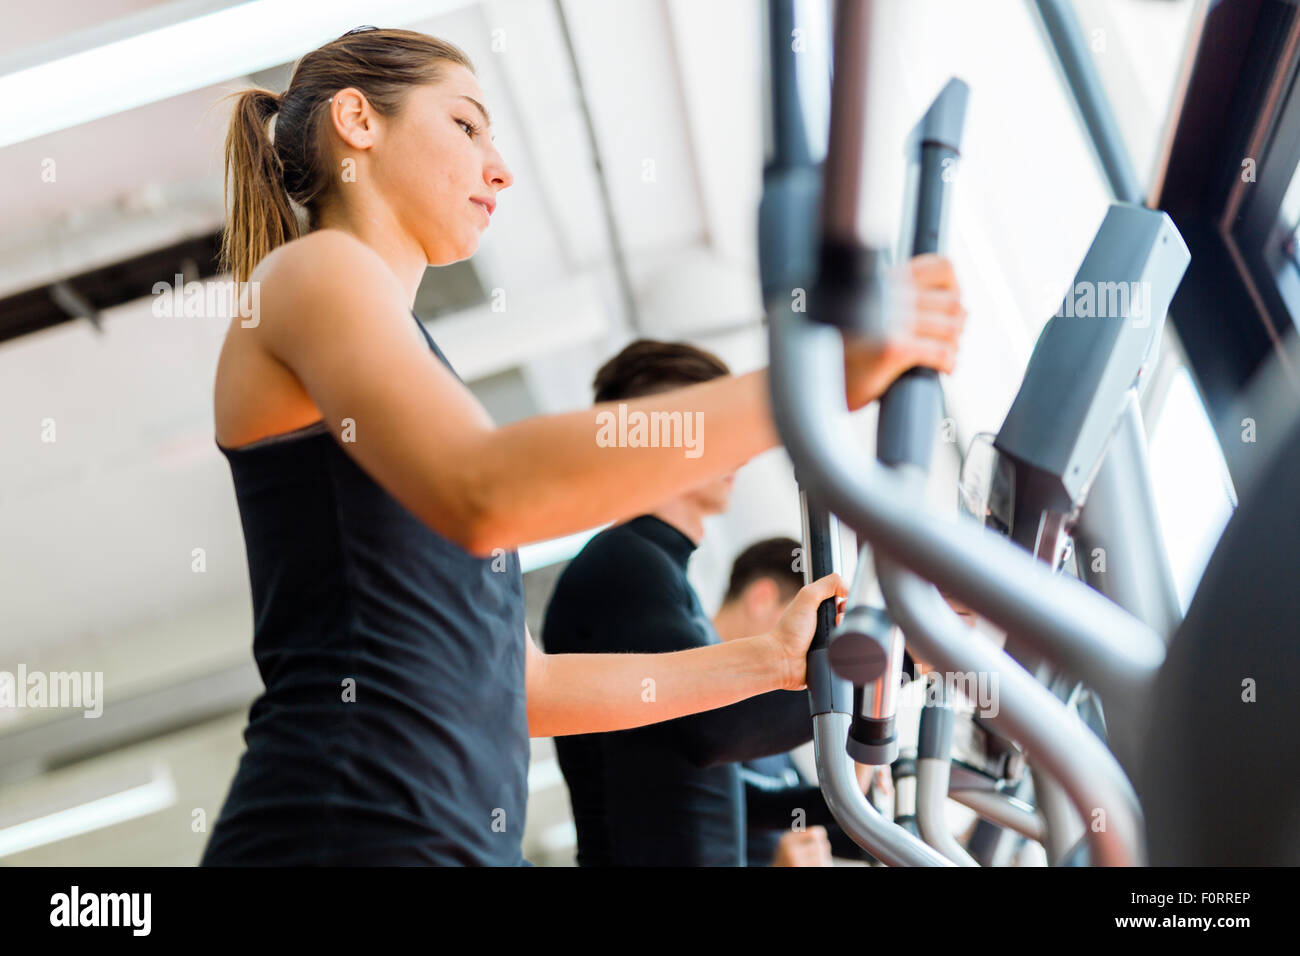 Beautiful fit young woman working out on a stepper together with her friends Stock Photo